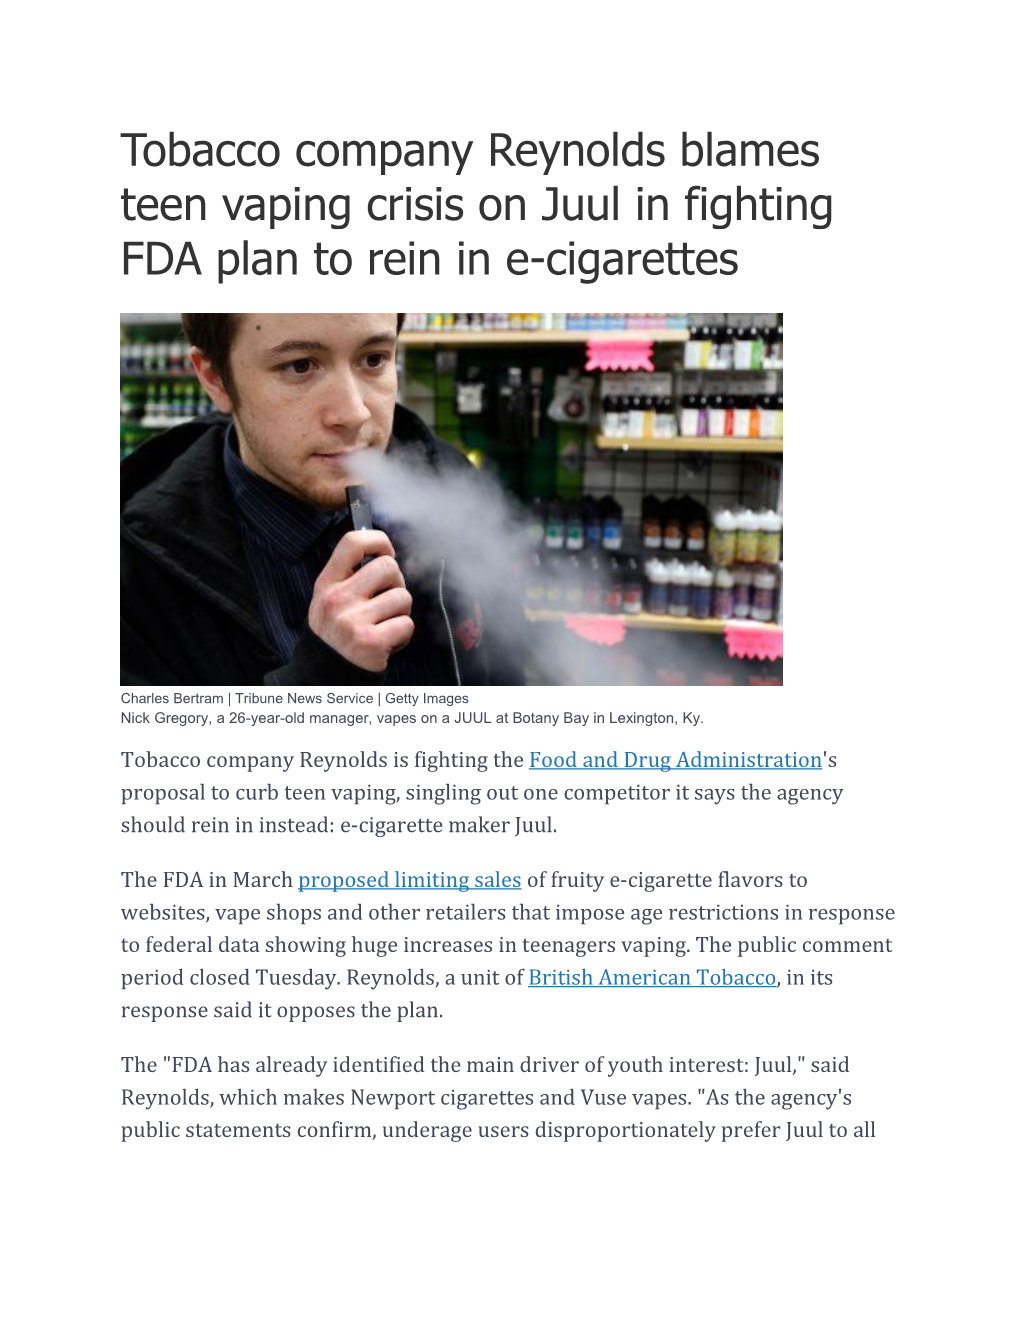 Tobacco Company Reynolds Blames Teen Vaping Crisis on Juul in Fighting FDA Plan to Rein in E-Cigarettes